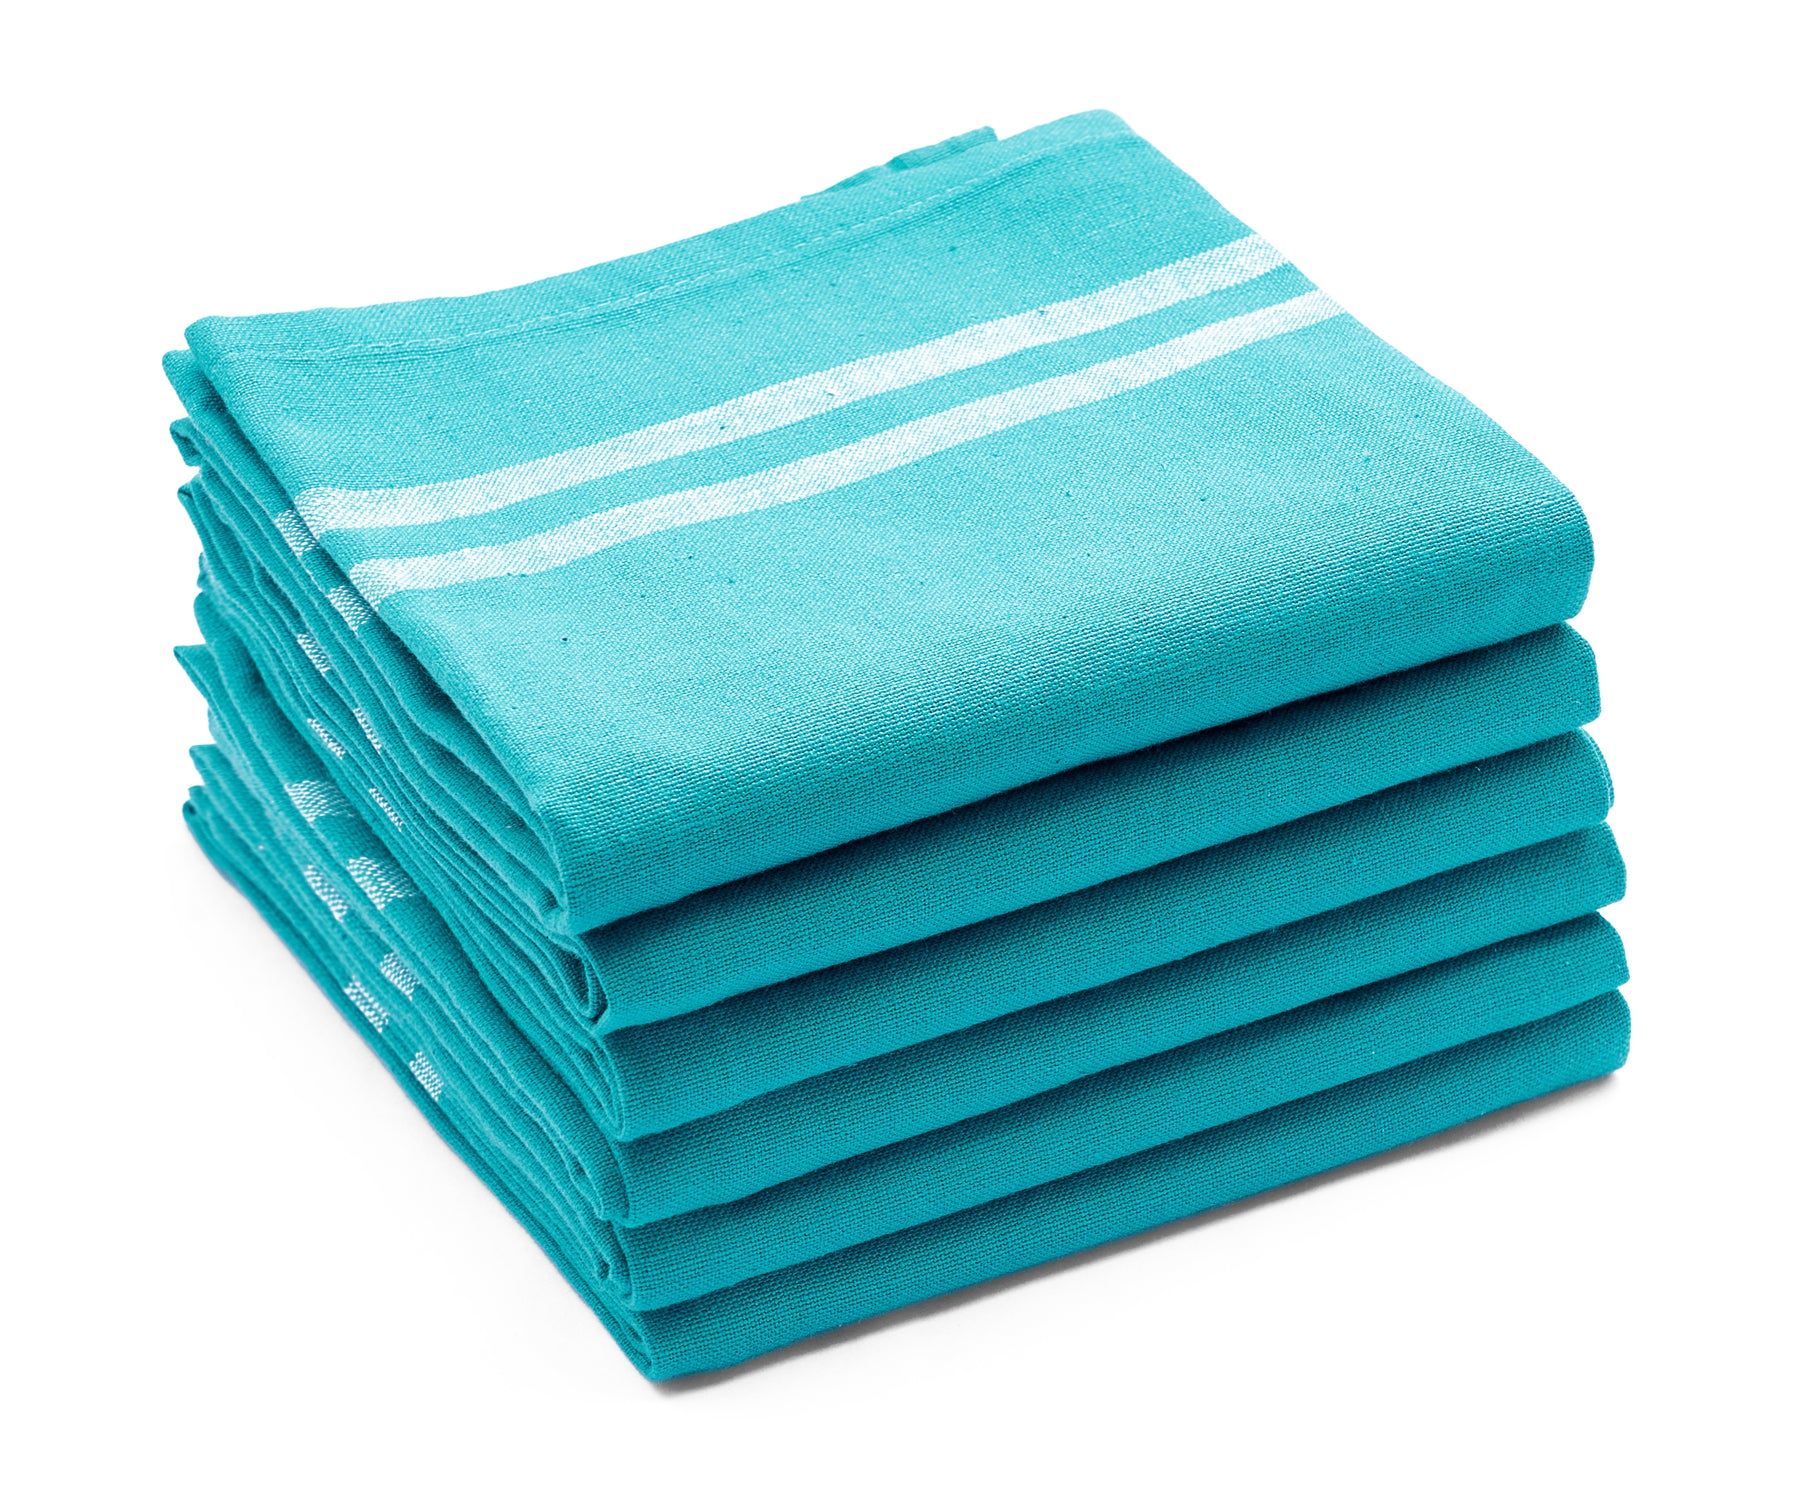 Four turquoise farmhouse kitchen hand towels stacked together